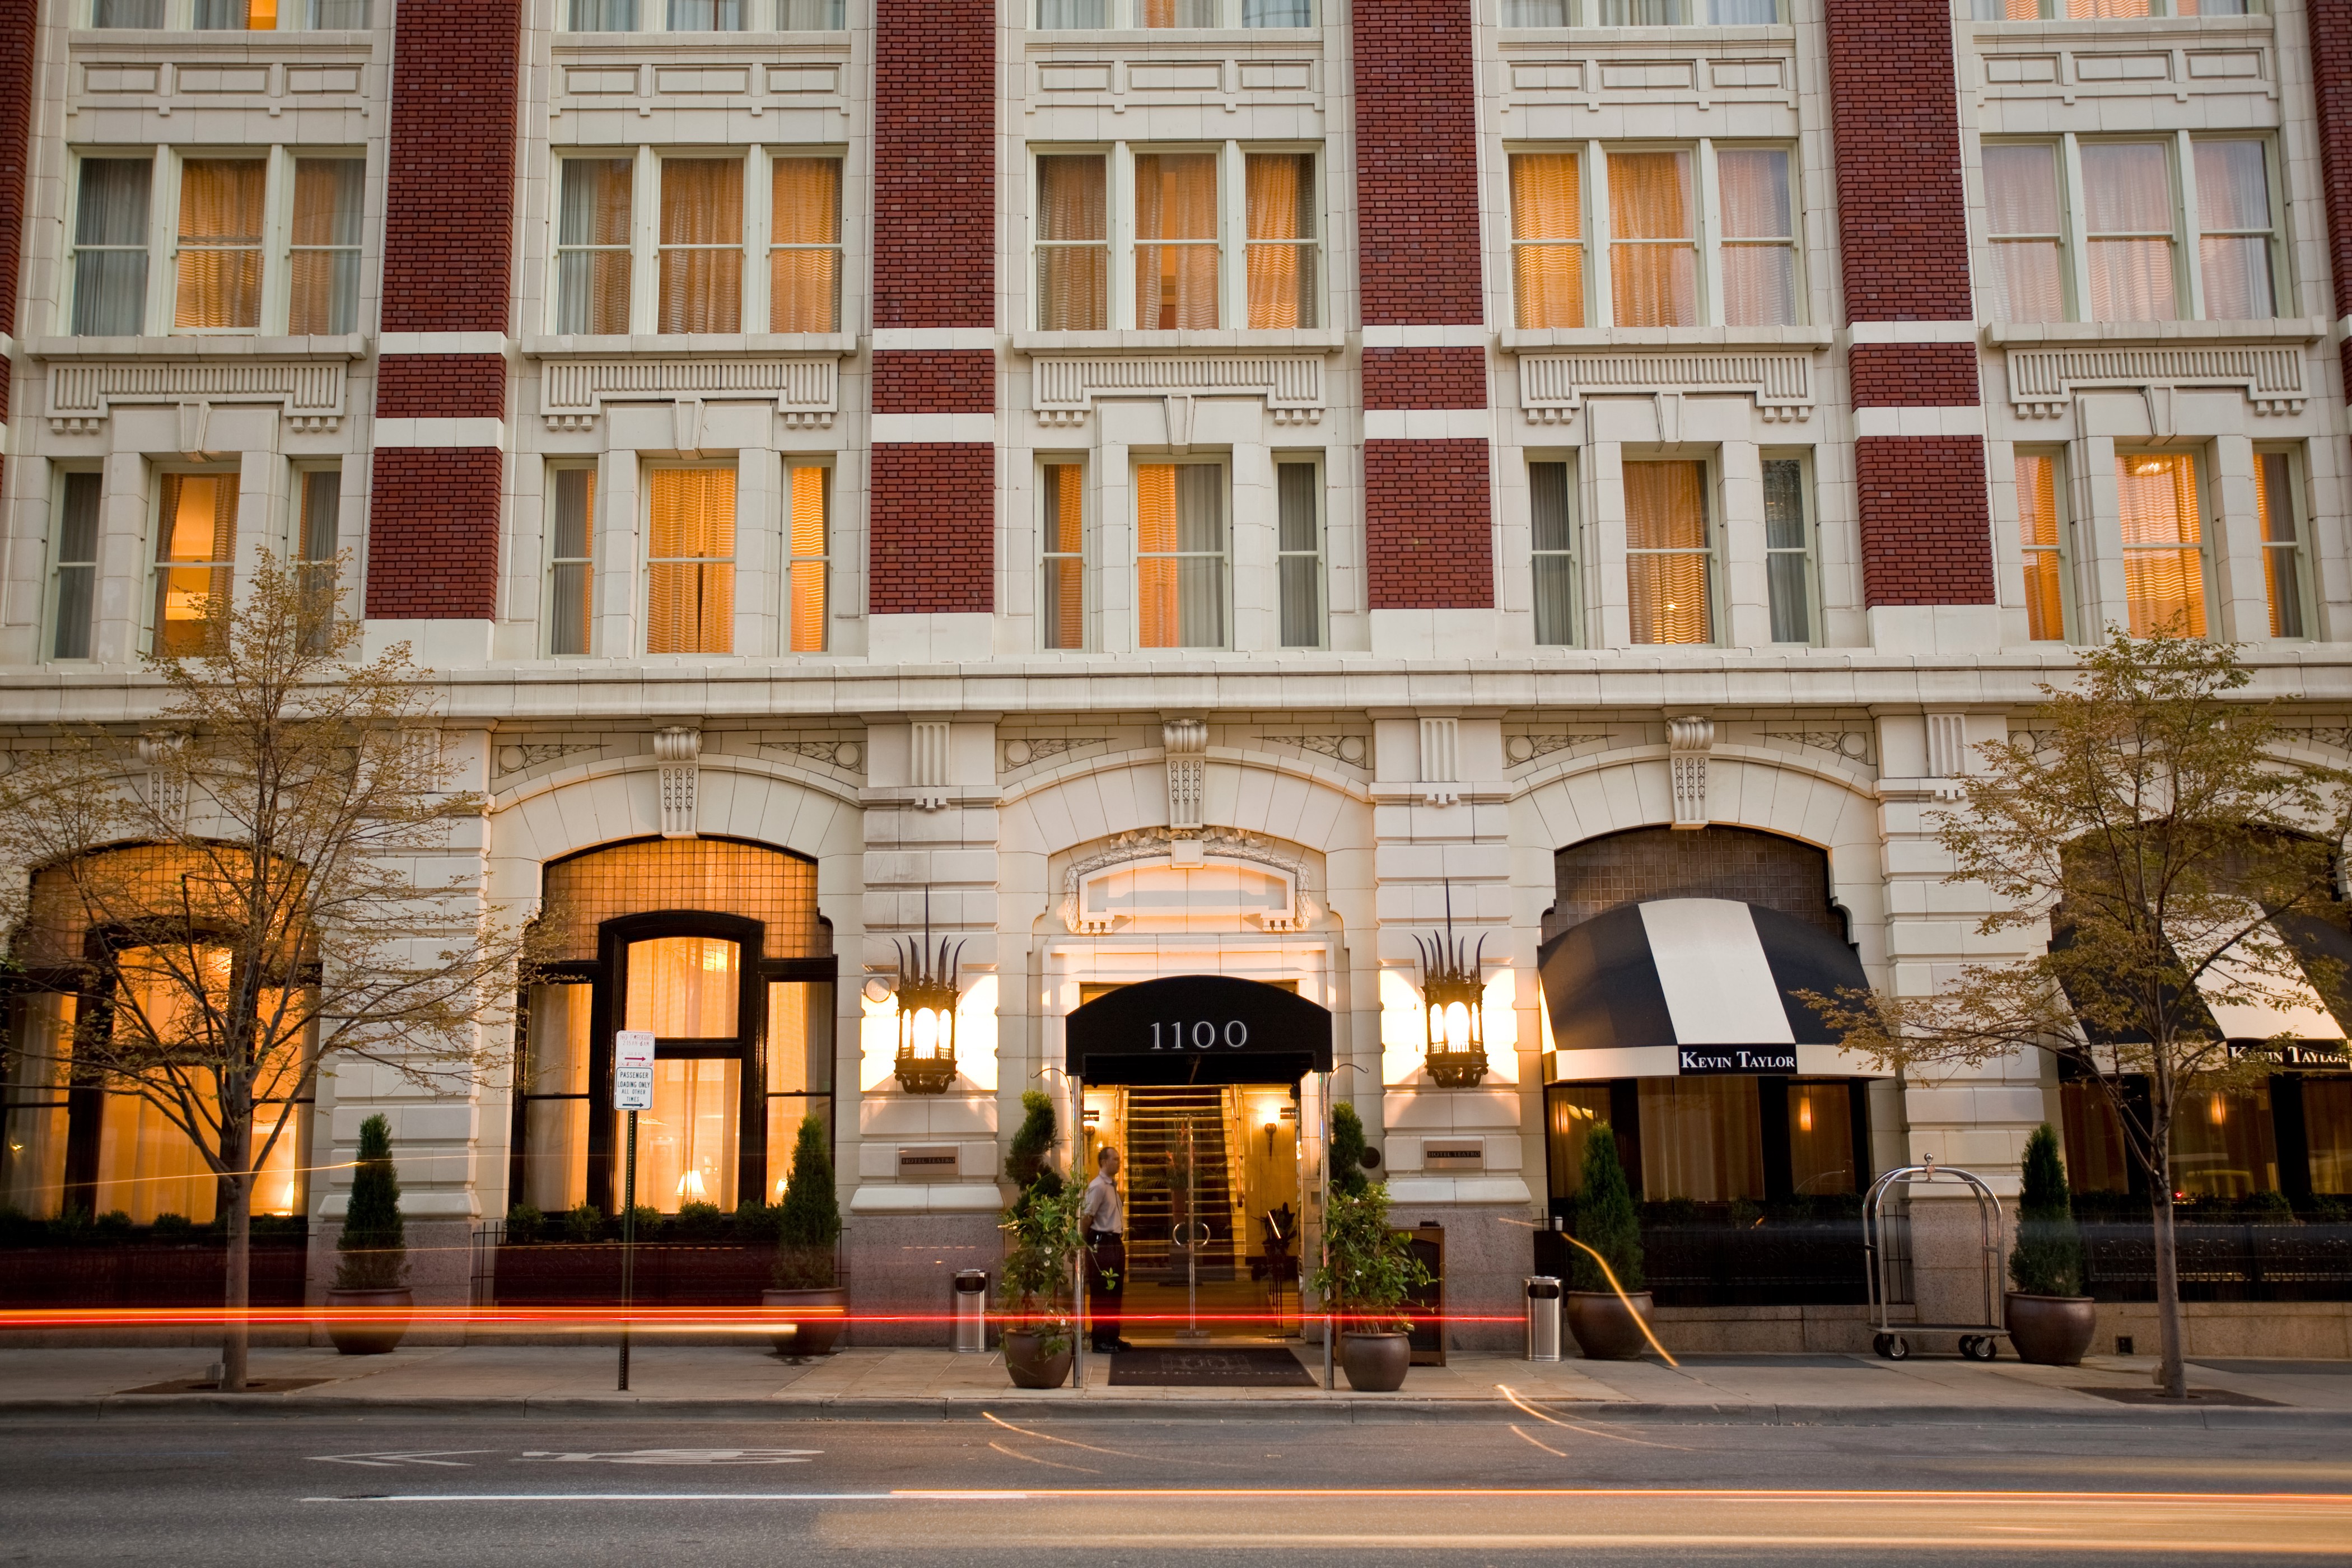 Guests at Hotel Teatro - A Downtown Denver Hotel, enjoy beautiful accommodations and an ideal location.